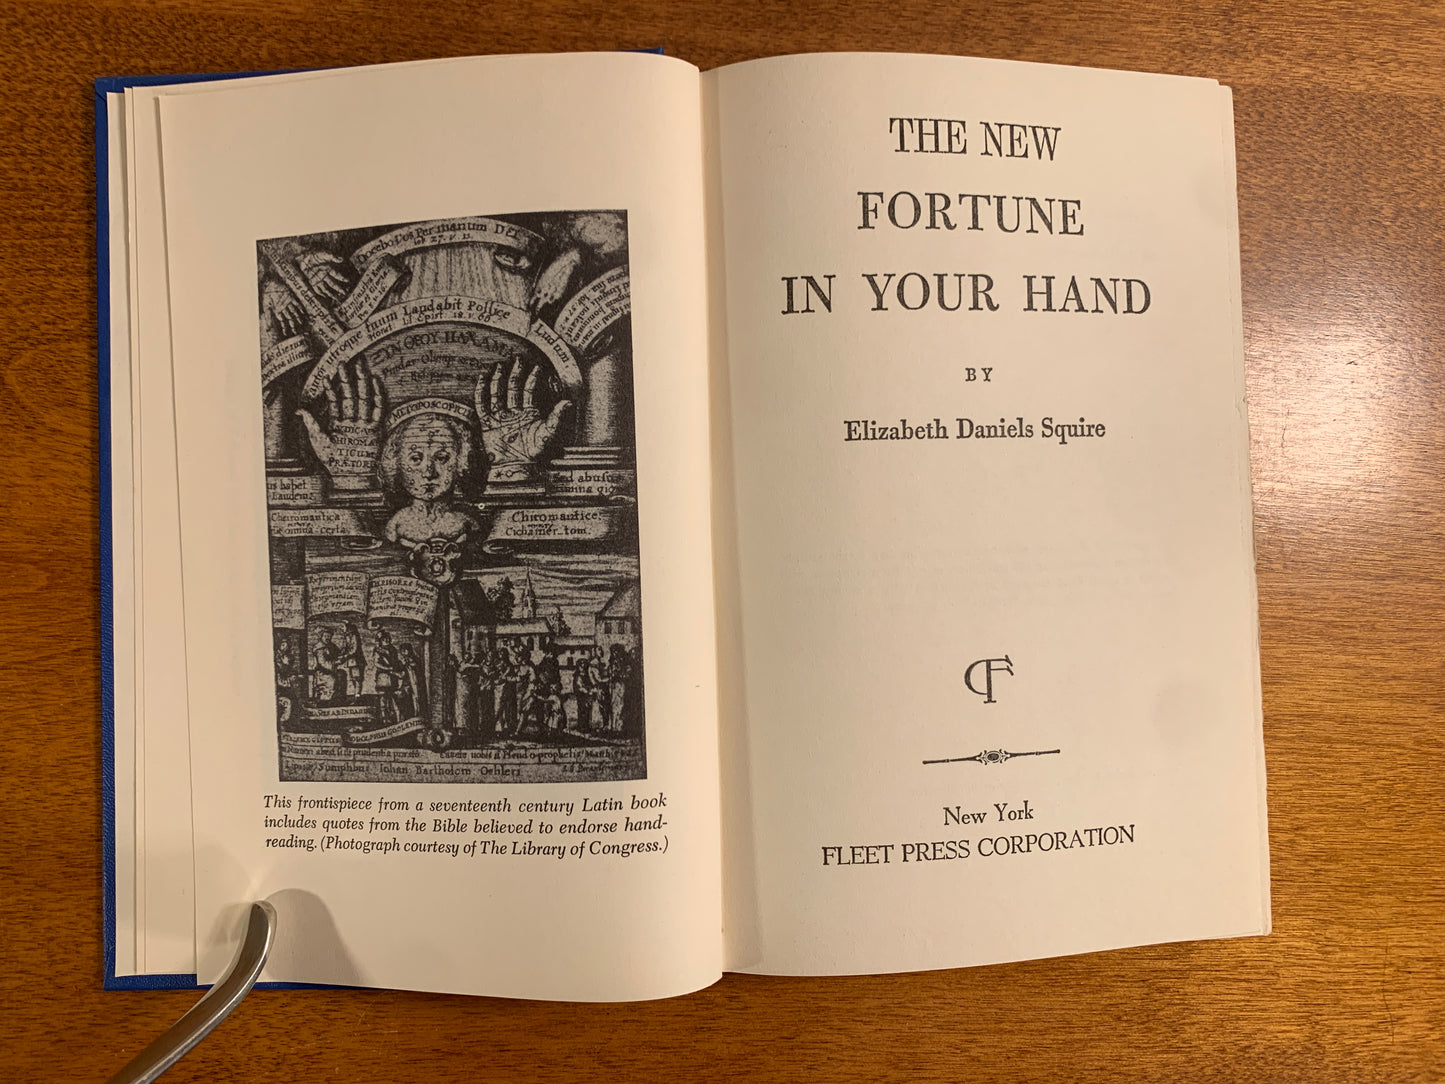 The New Fortune in Your Hand by Elizabeth Daniels Squire [1960]